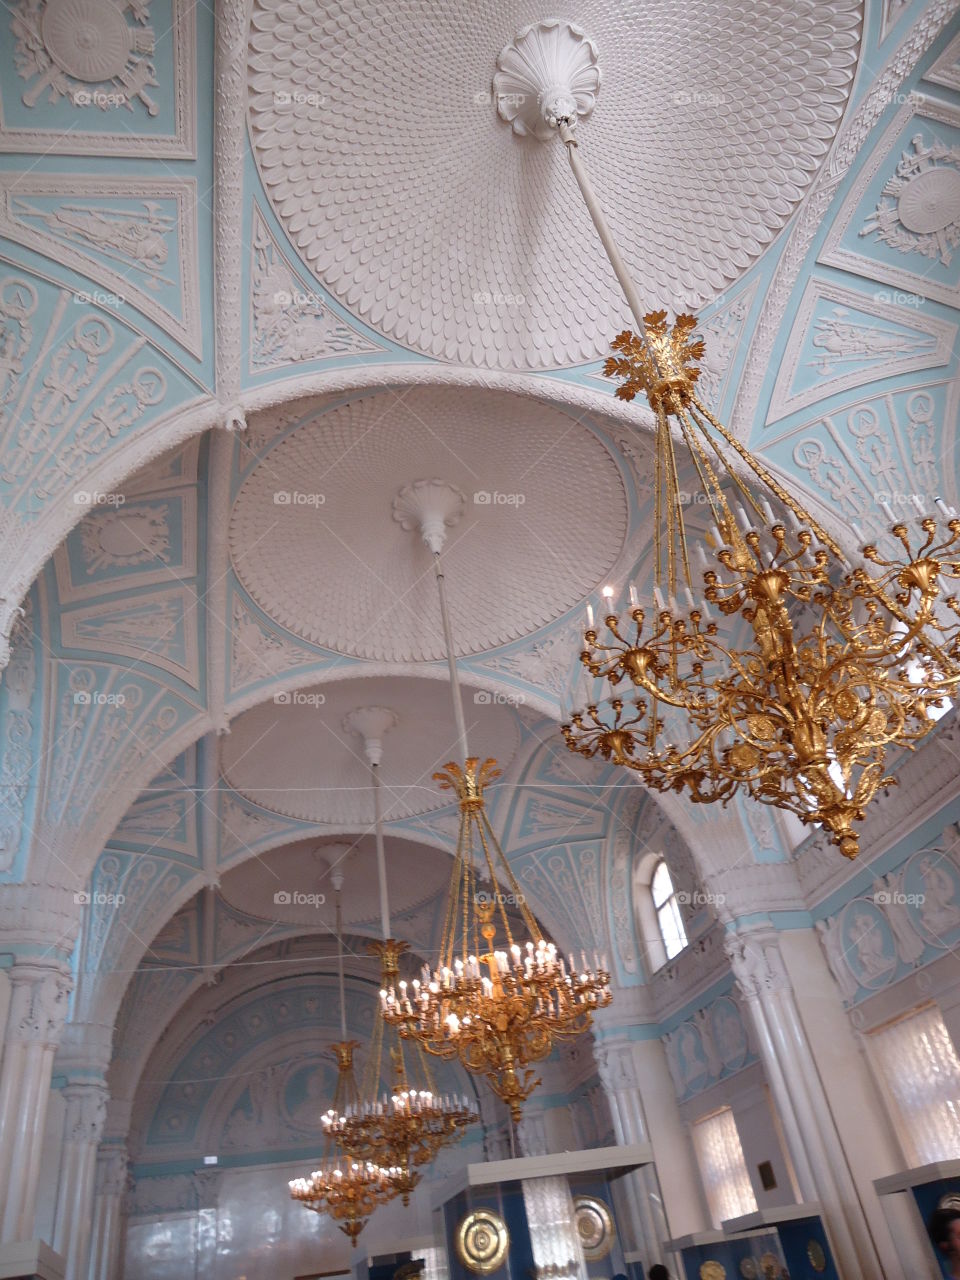 Once upon a time.... Such a beautifully designed ceiling fit for a queen.